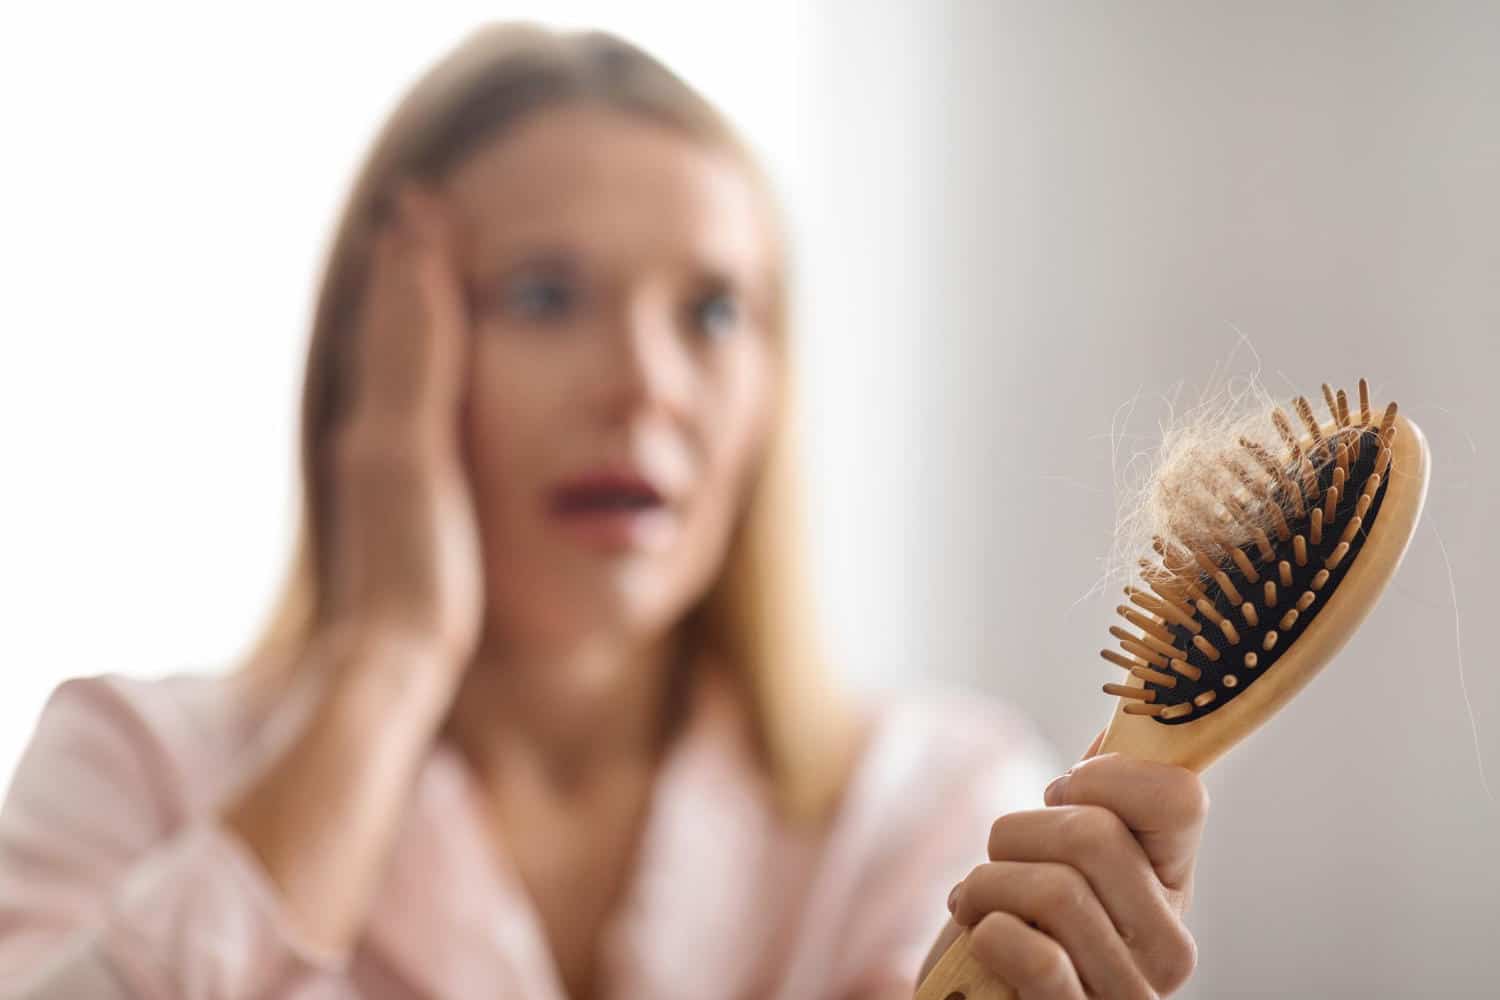 comment nettoyer brosse a cheveux